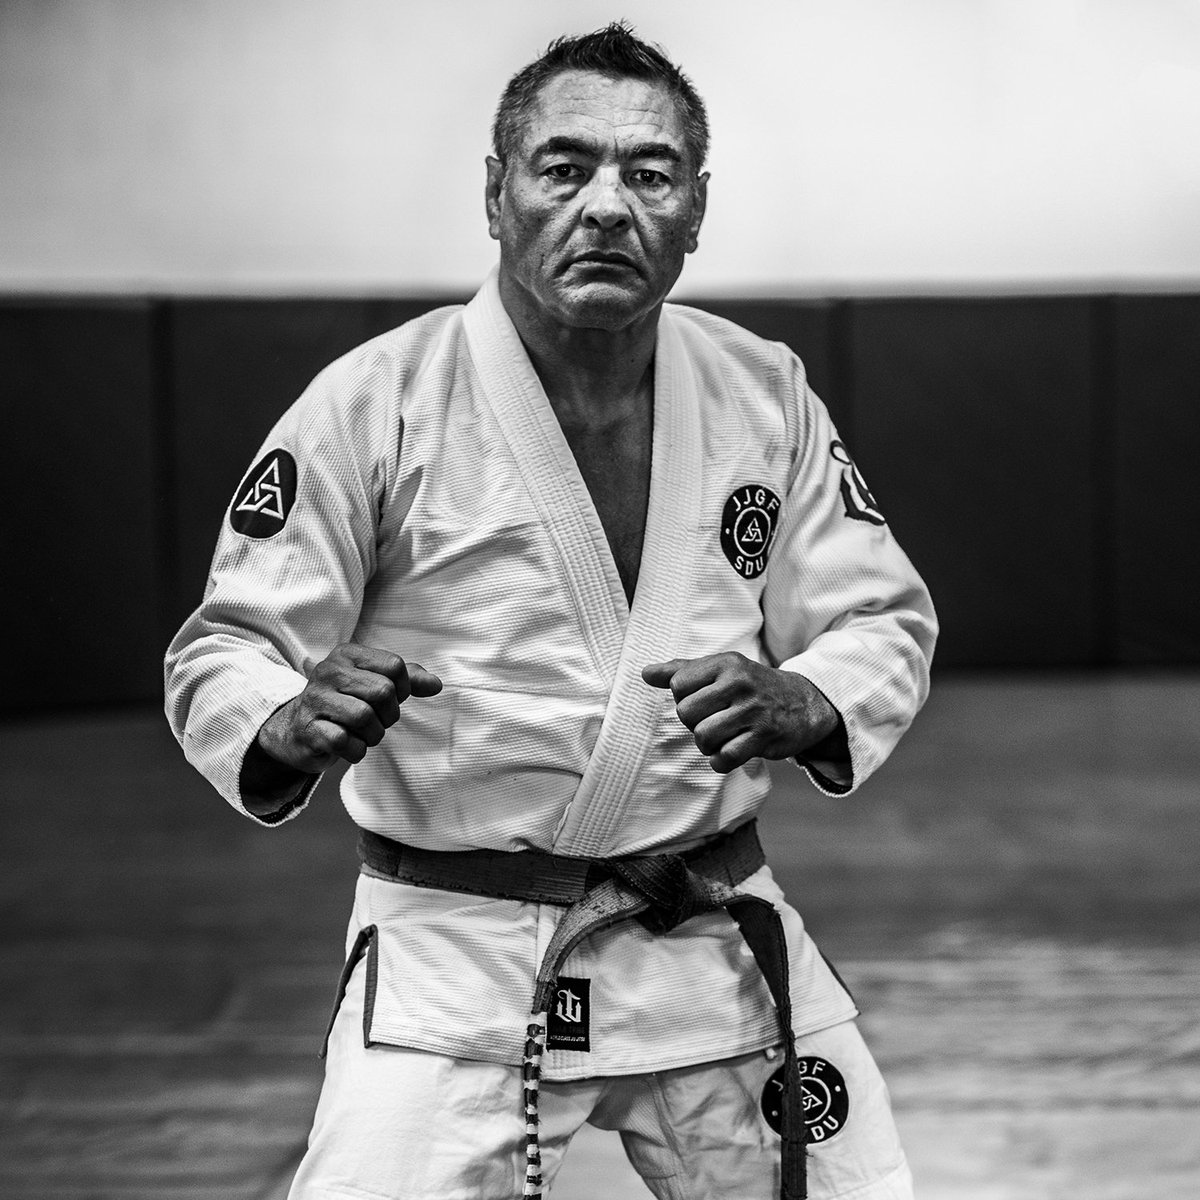 Sick And Rare Rickson Gracie BJJ Footage From The 1980′s